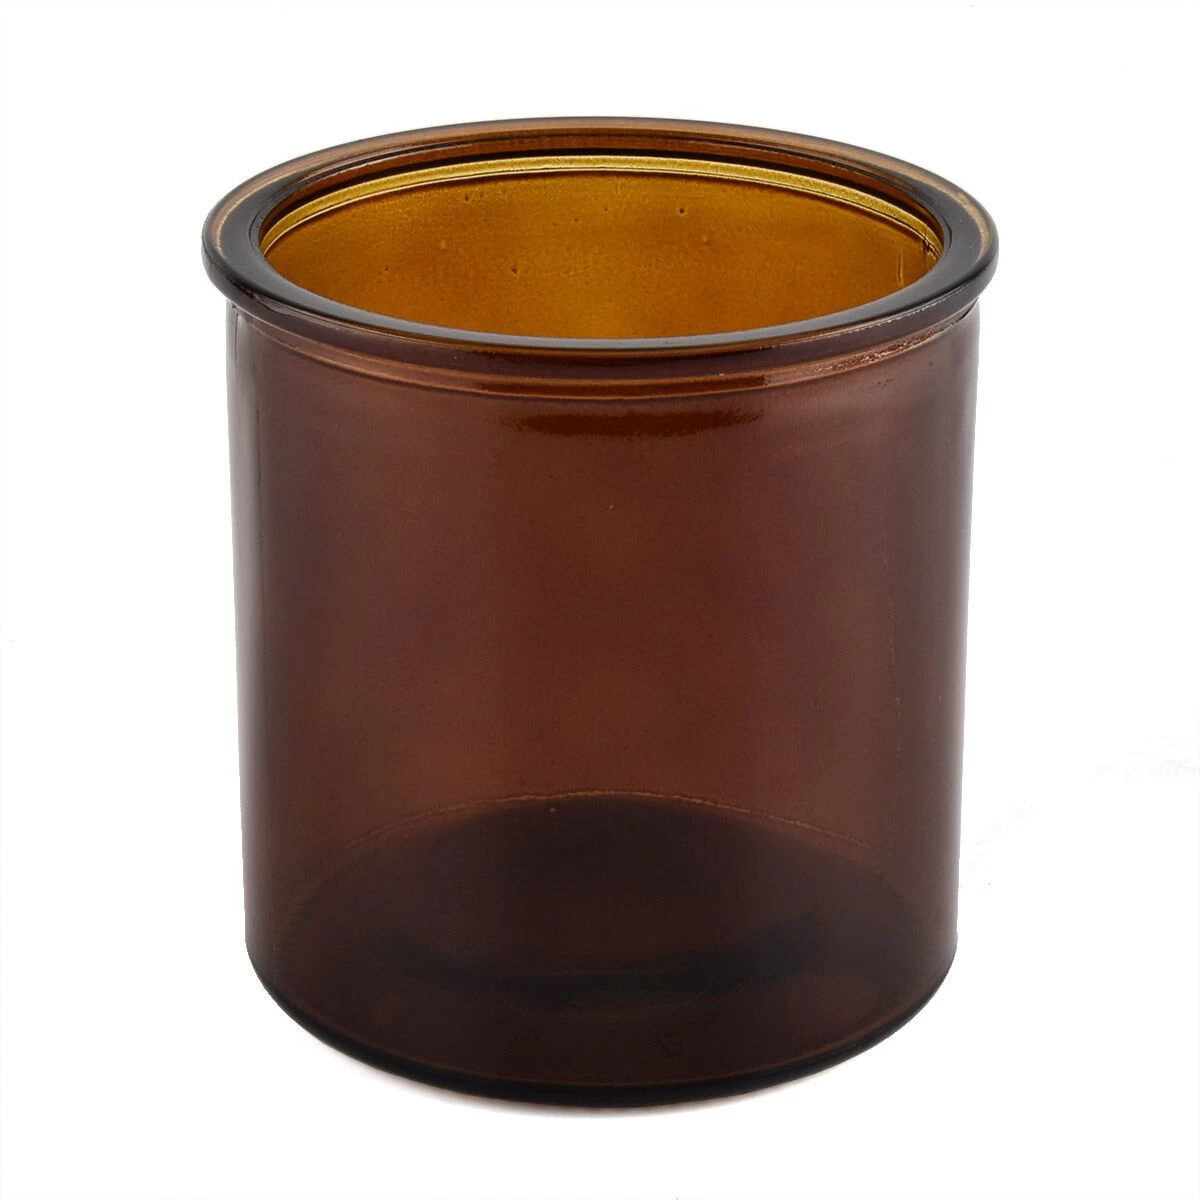 10oz glass candle container with cork lid